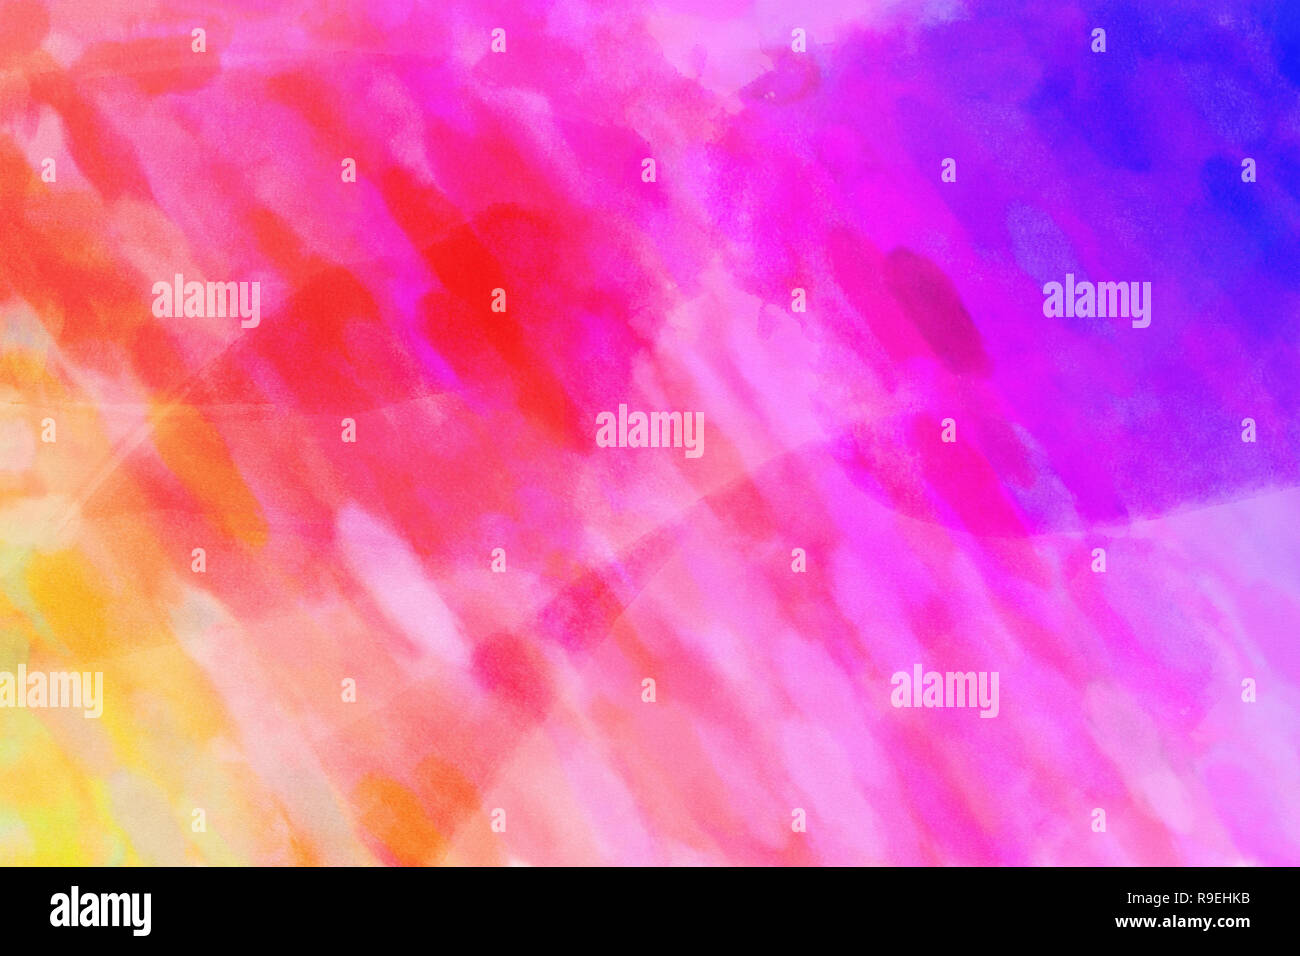 Orange pink purple watercolor gradient background. Colorful digital illustration simulating true watercolor with paper texture. Stock Photo